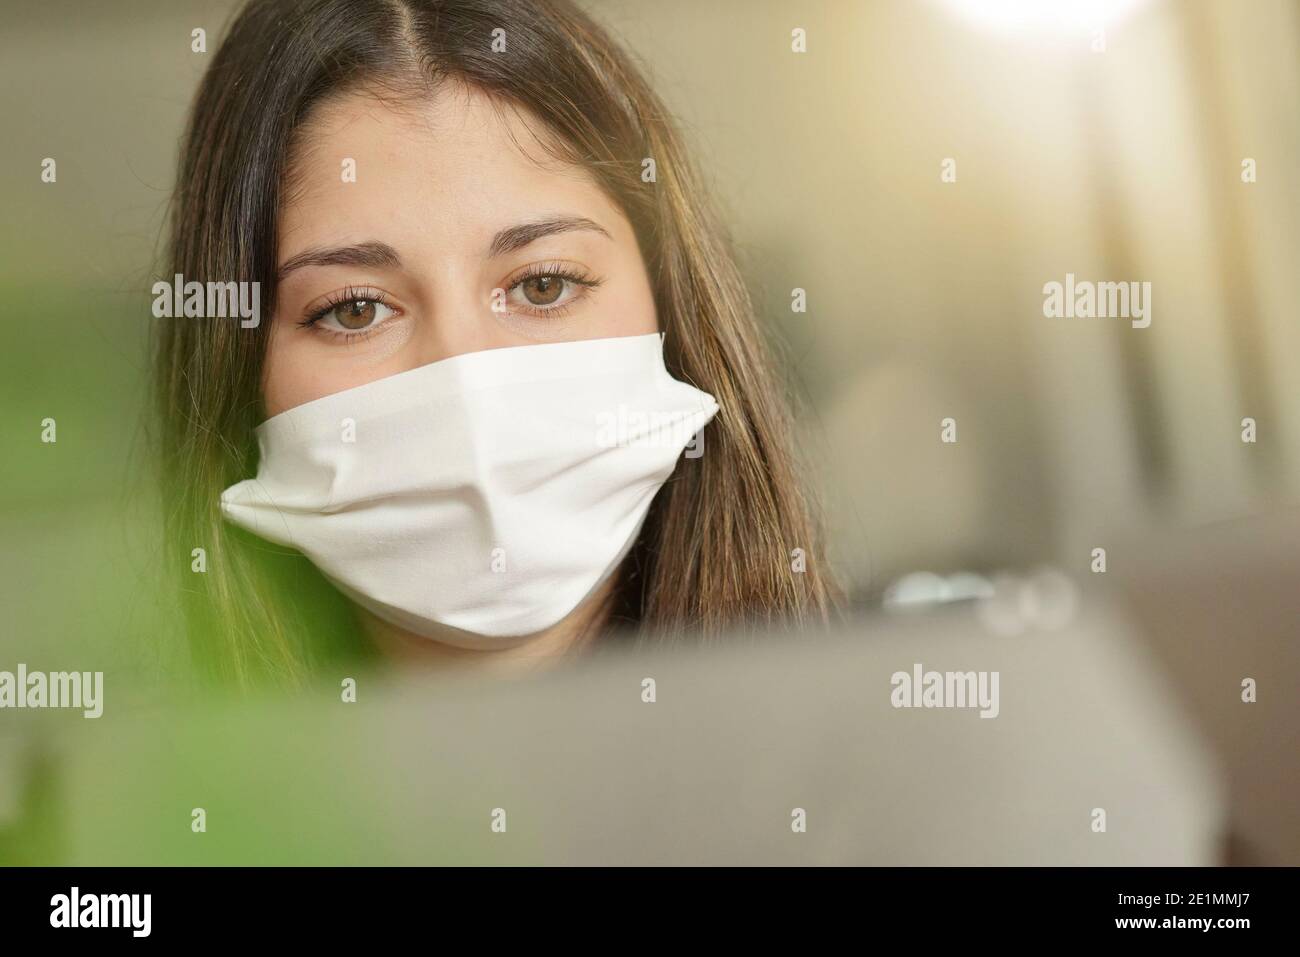 young student wearing a mask Stock Photo